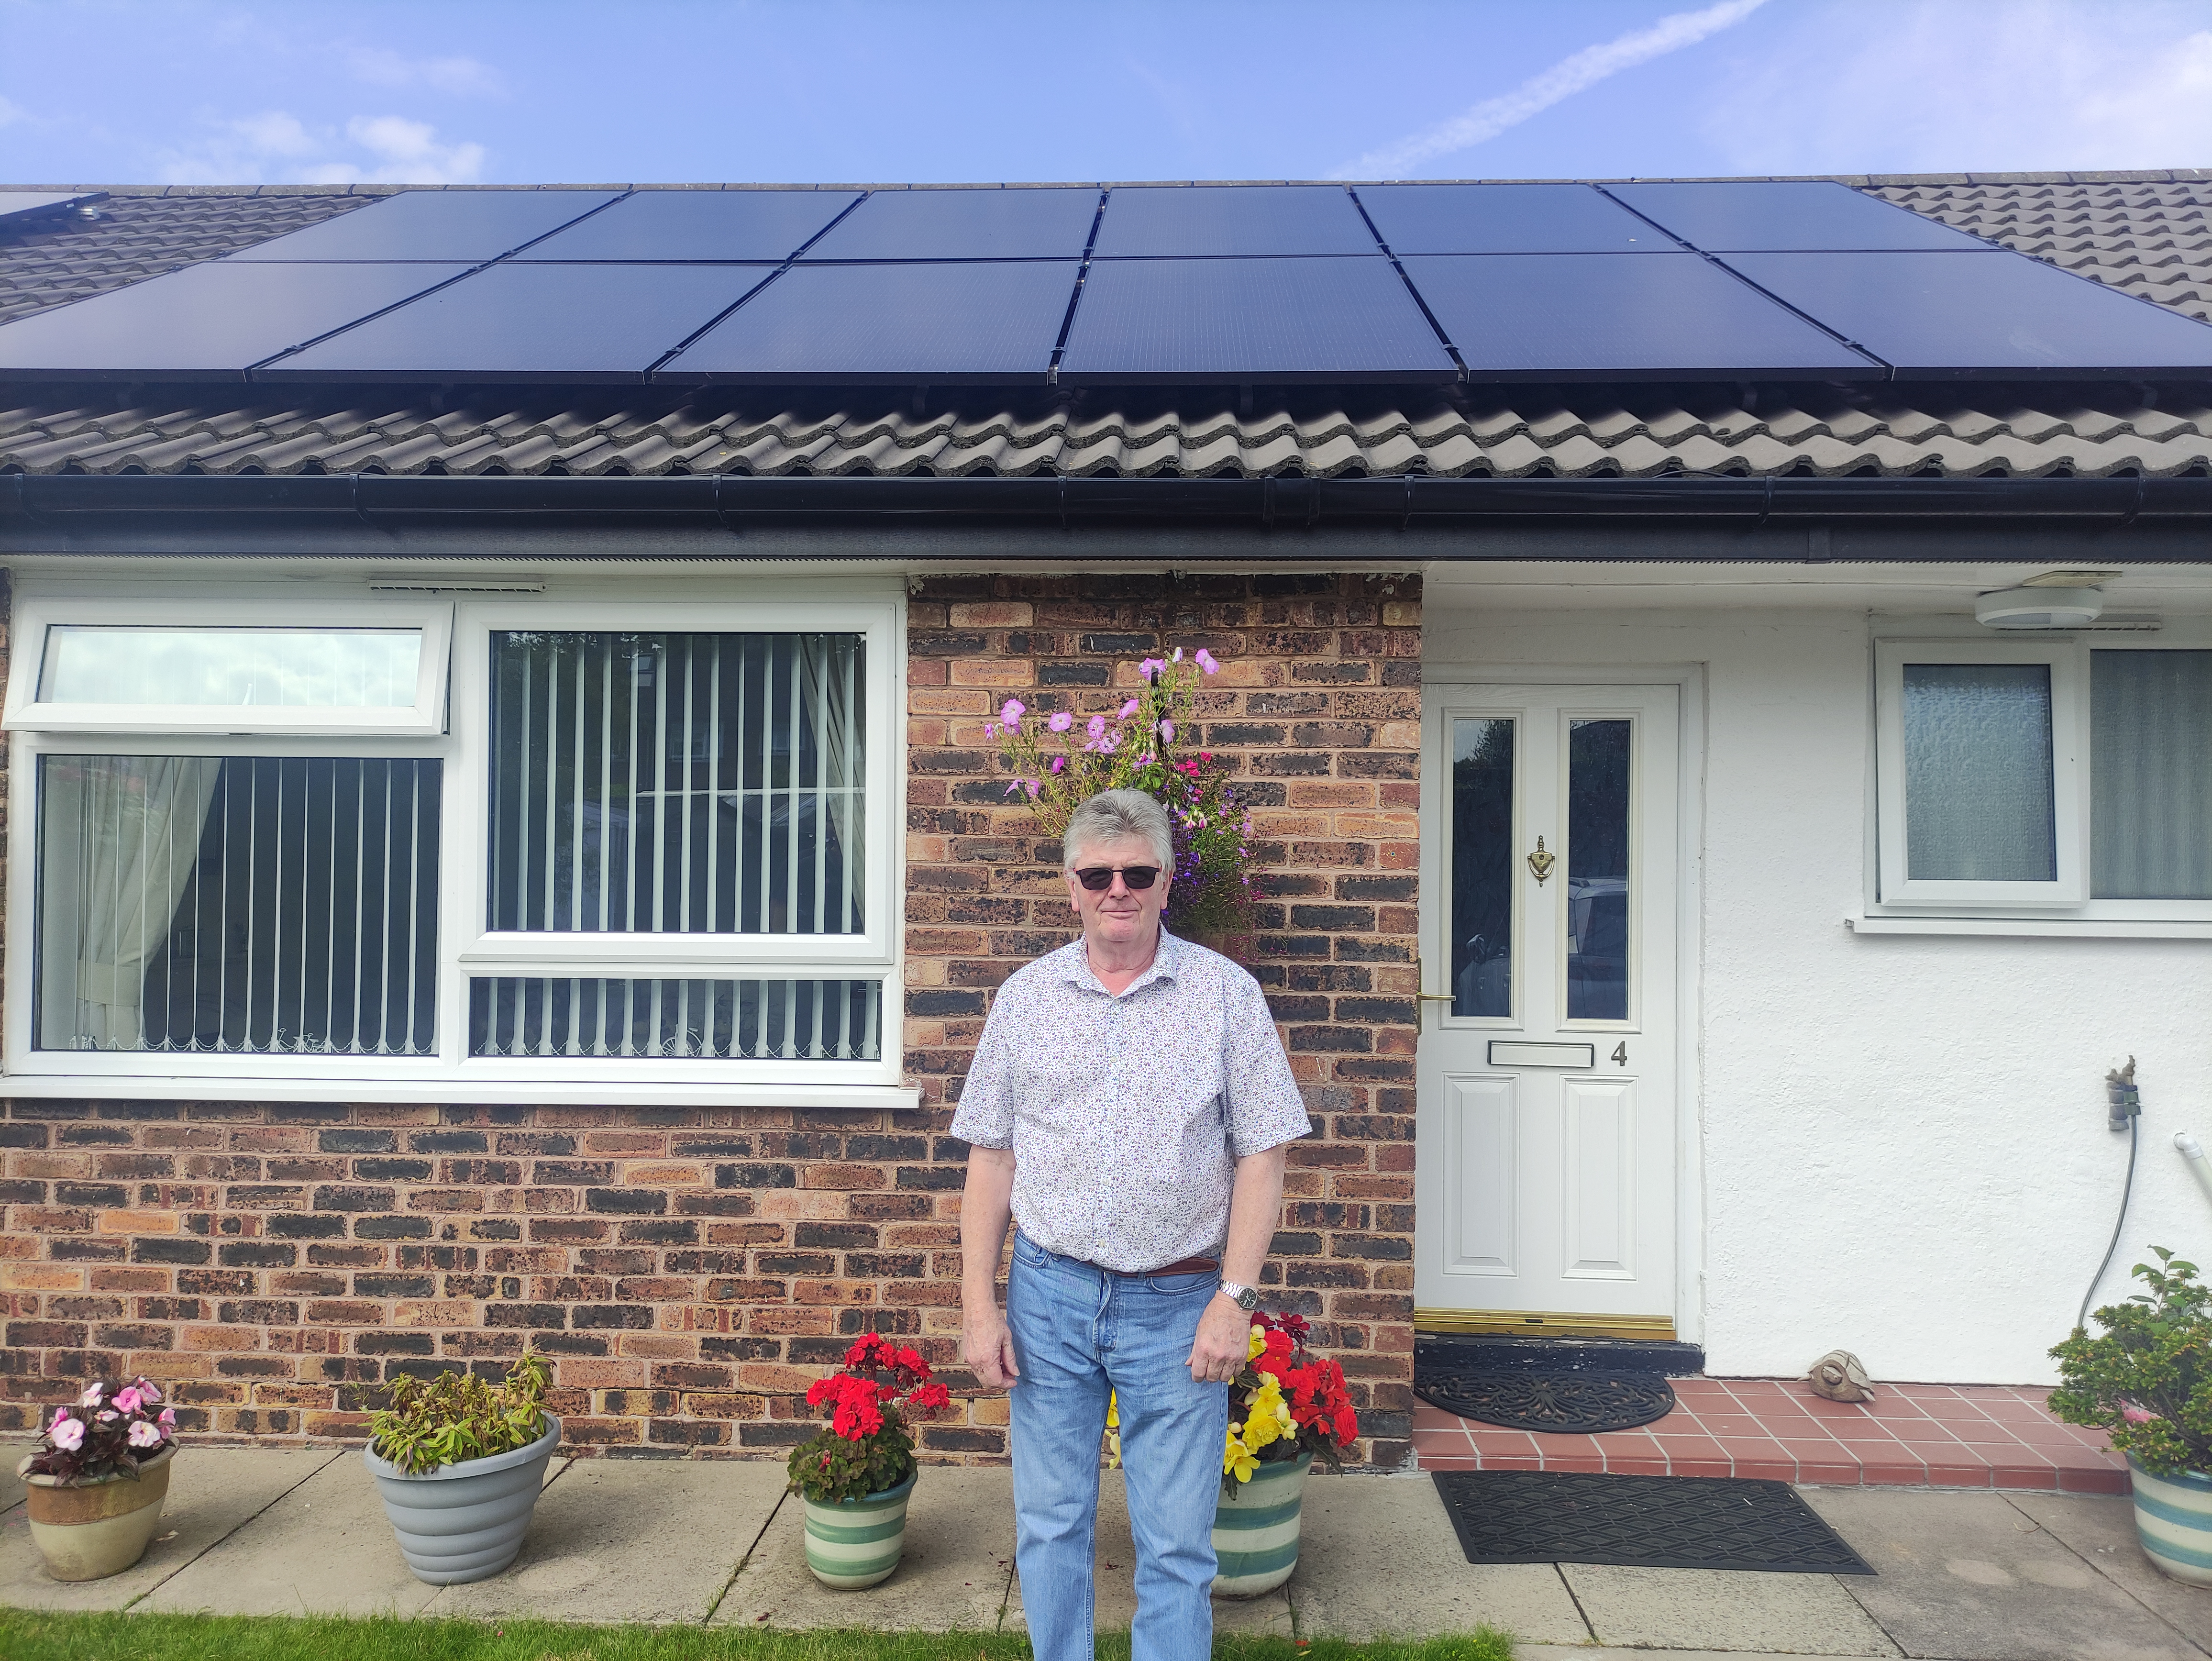 Our customer standing in front of his home, which has solar panels on the roof.